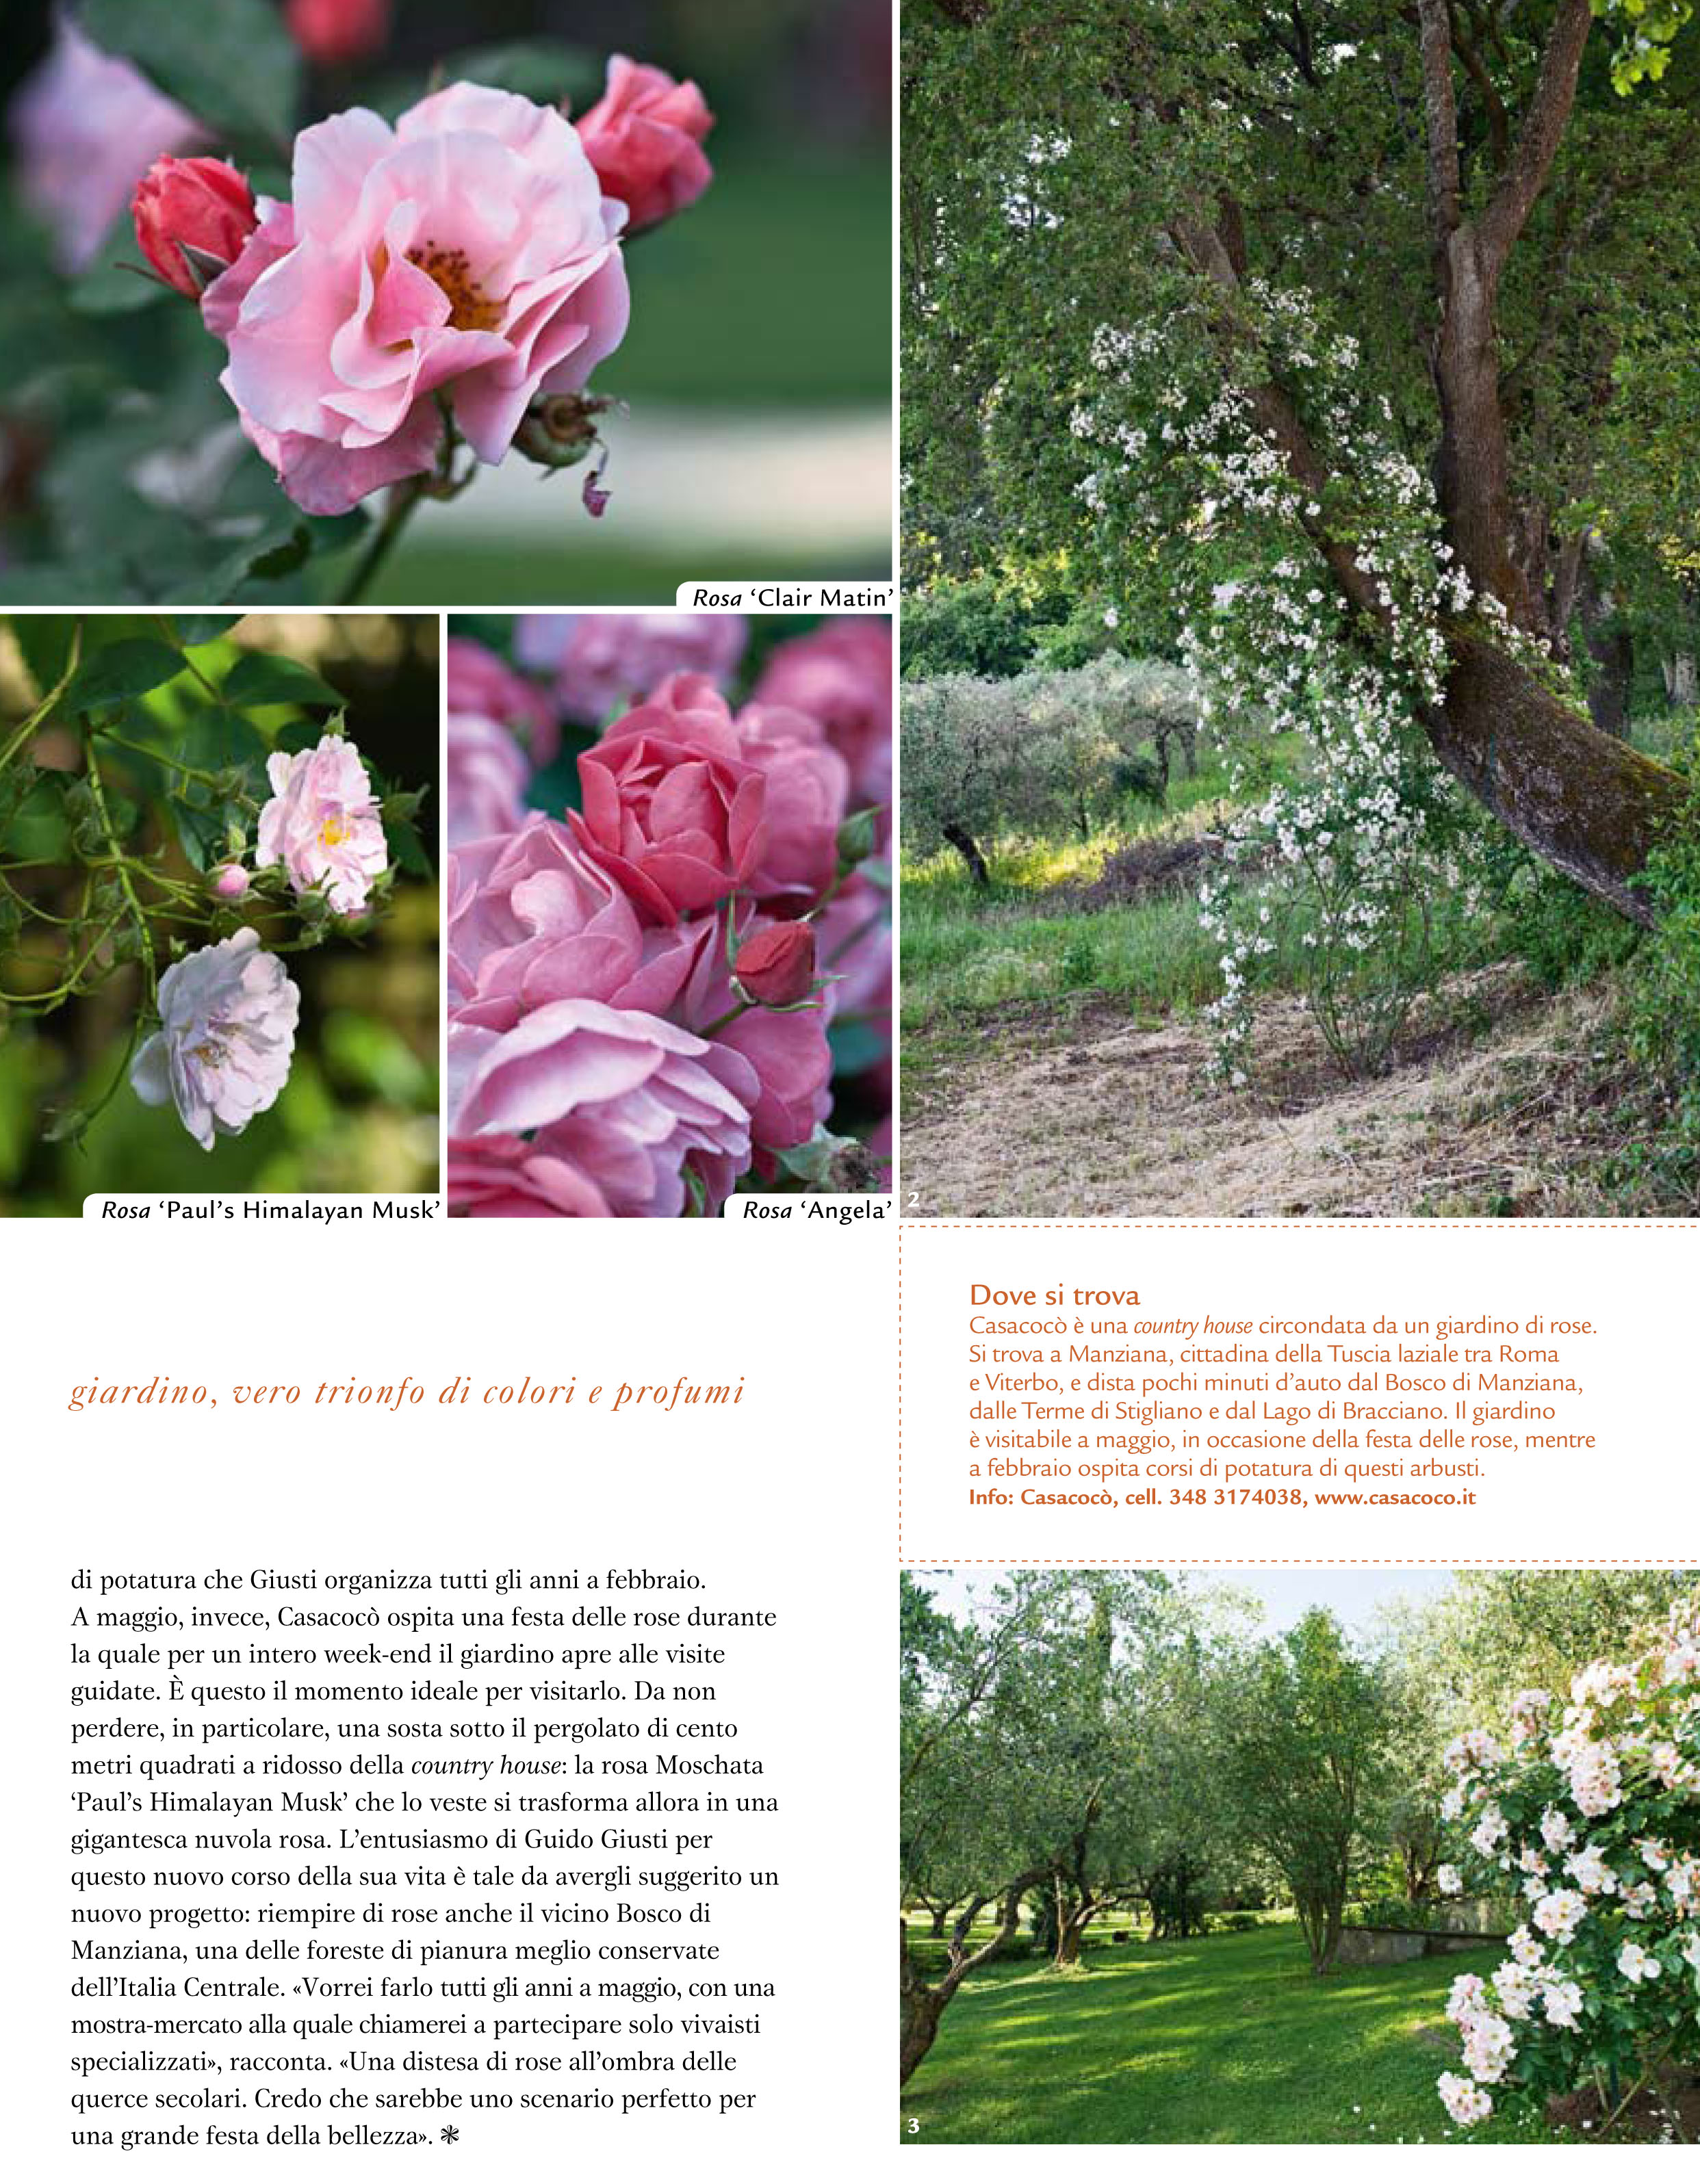 Gardenia October 2014 - in this photo: "Angela", "Clair Matin", and "Paul's Himalayan Musk” roses